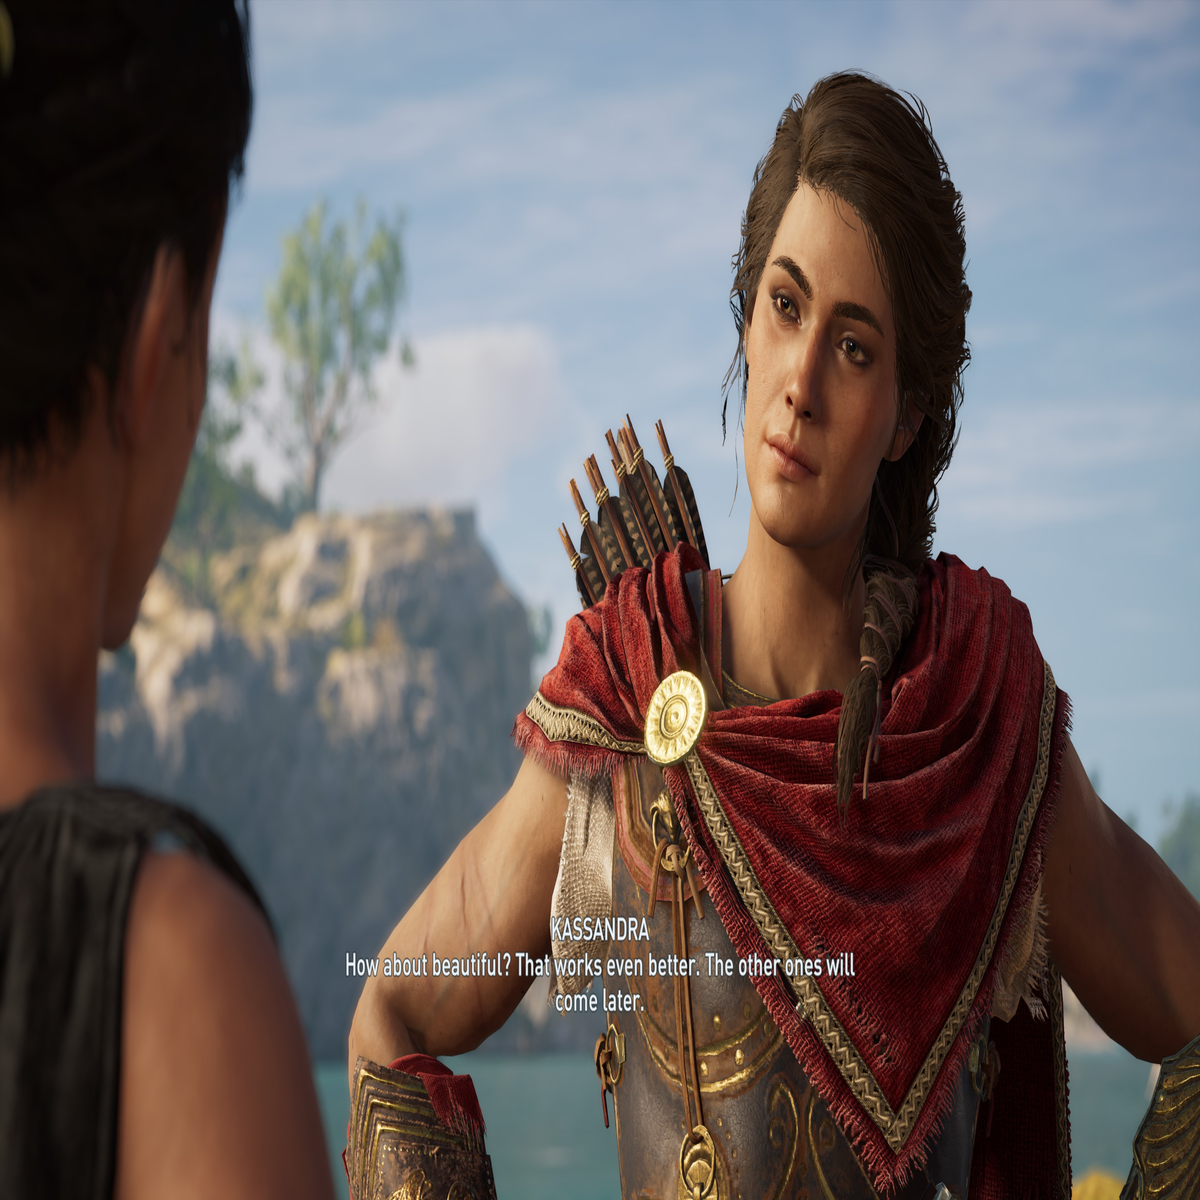 Ubisoft changing Assassin's Creed Odyssey DLC following forced relationship  furore